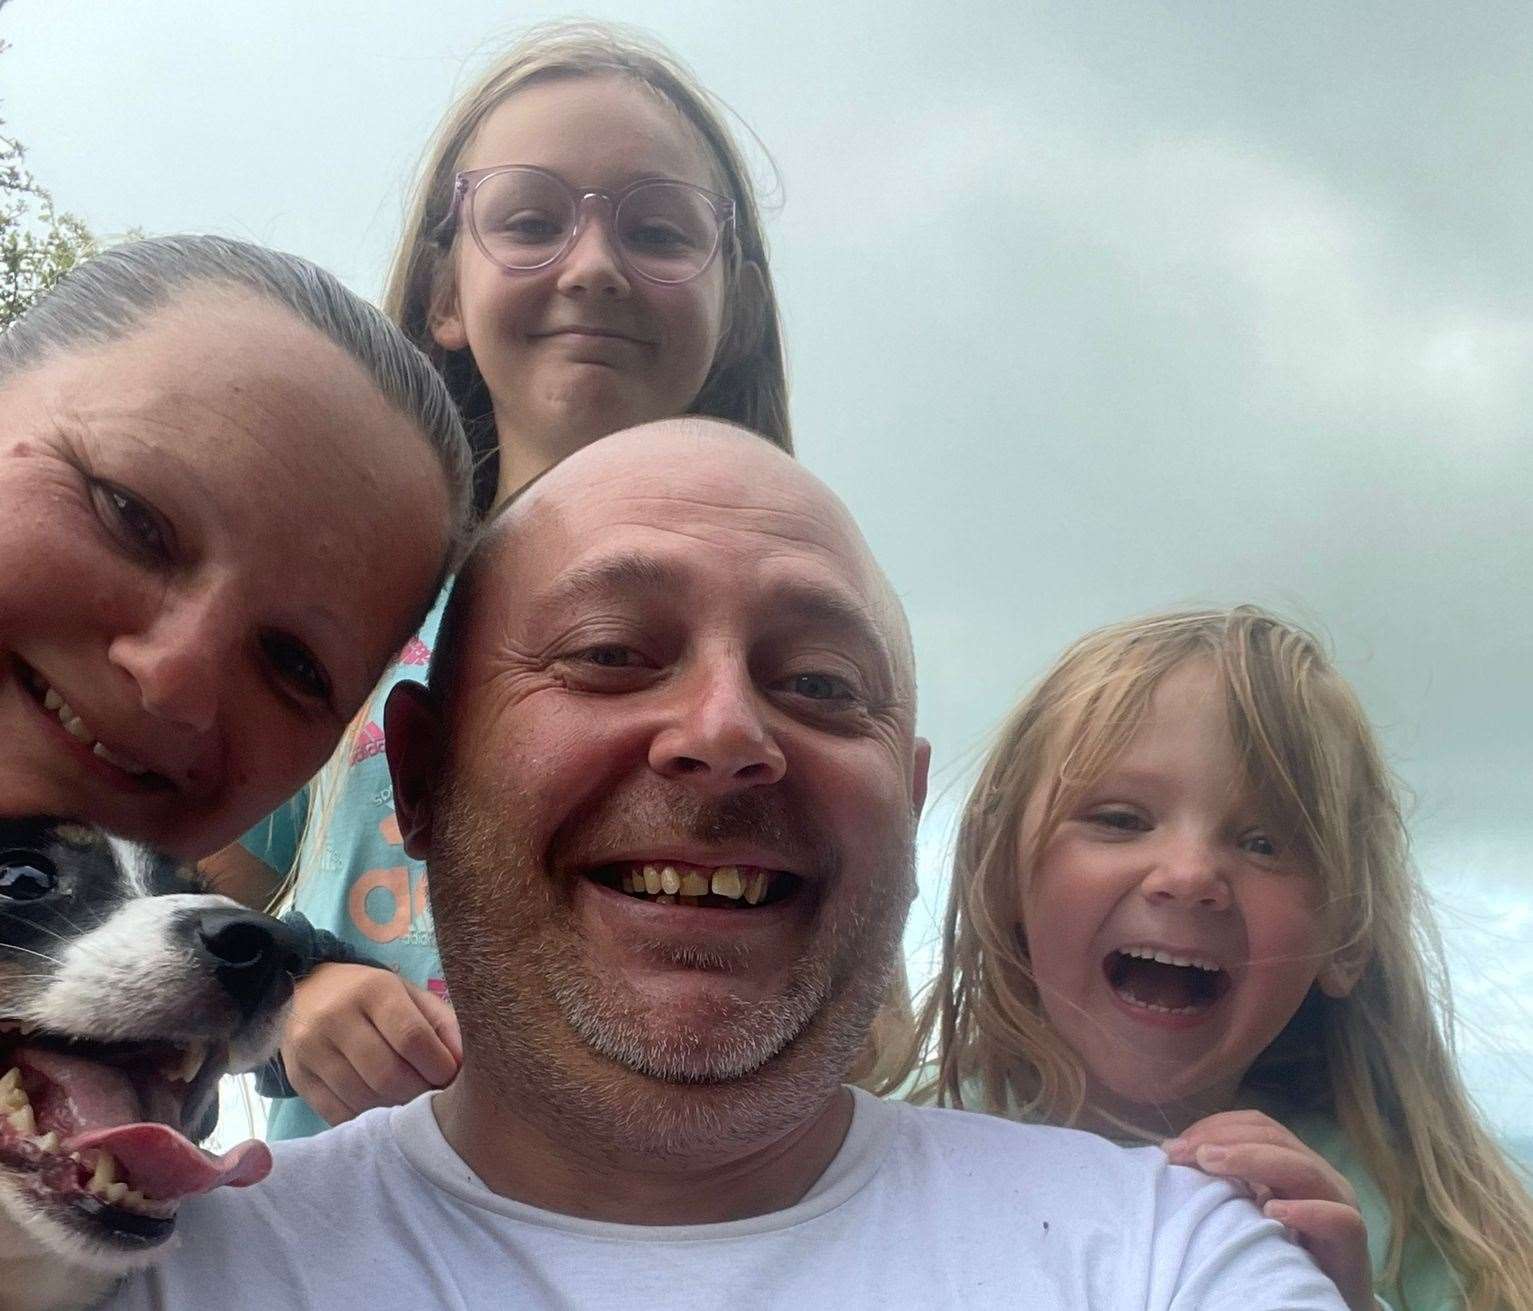 Gemma and Gareth Porter with children Niamh and Isla, and dog Bernie, are preparing to take in a family of four Ukrainians